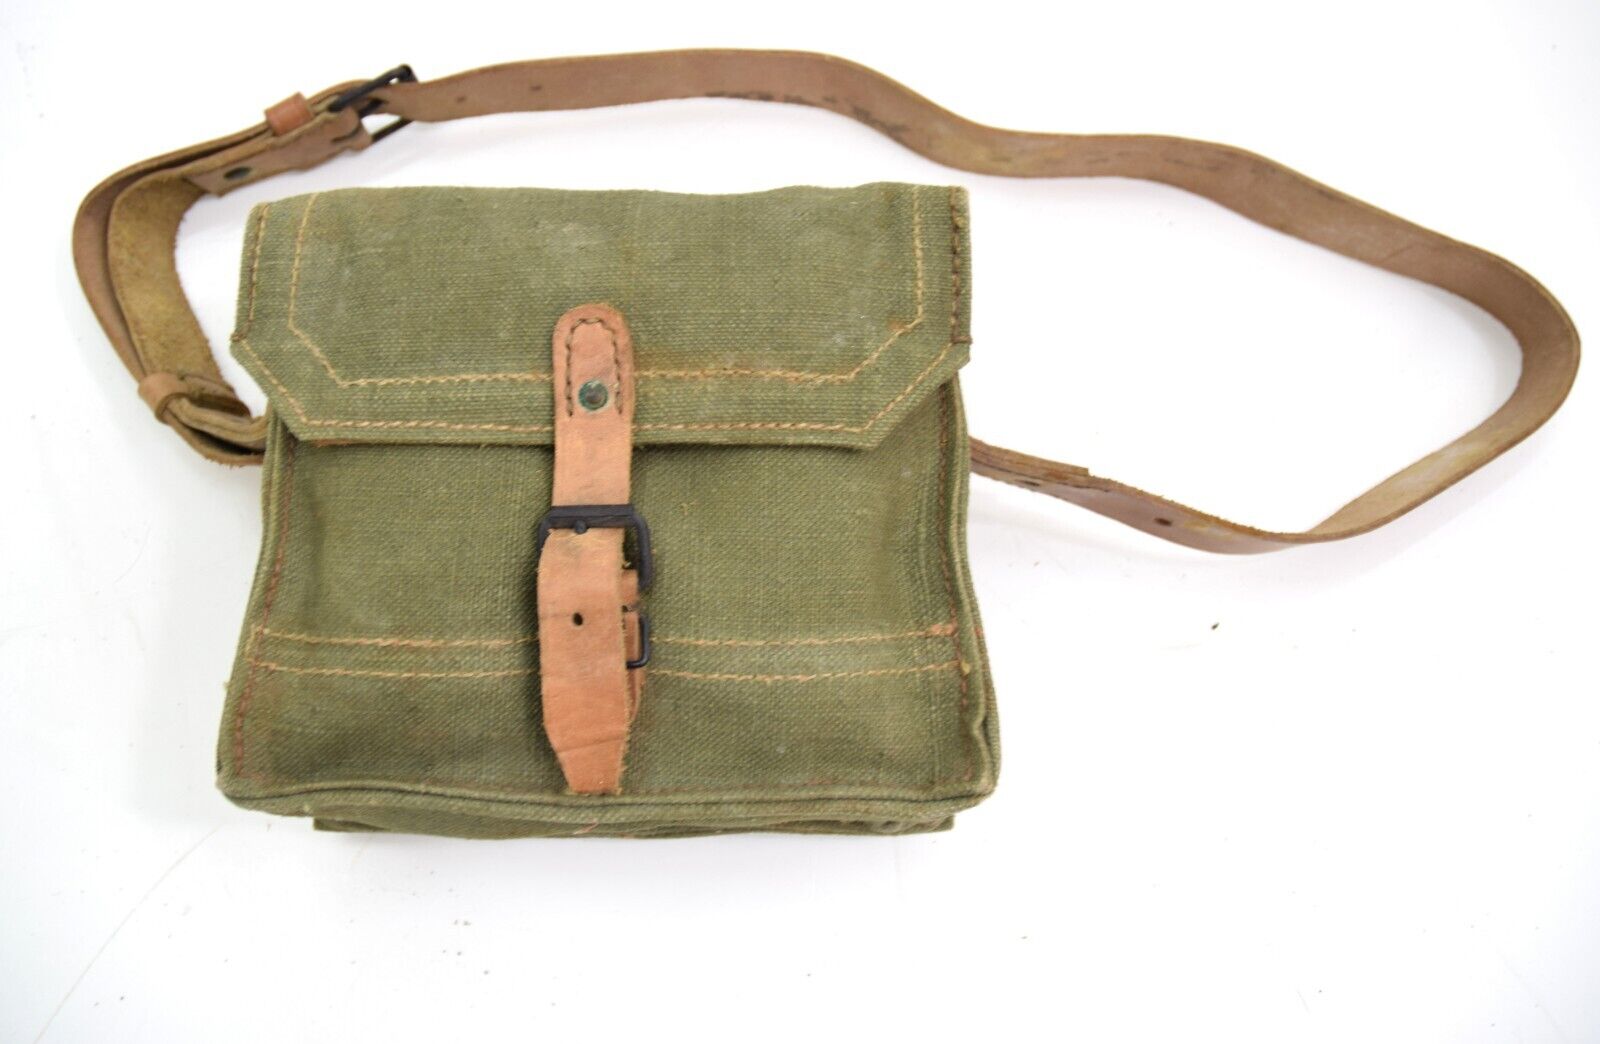 Vintage French Army Canvas Satchel With Leather Strap Ammo Magazine Mussete Bag